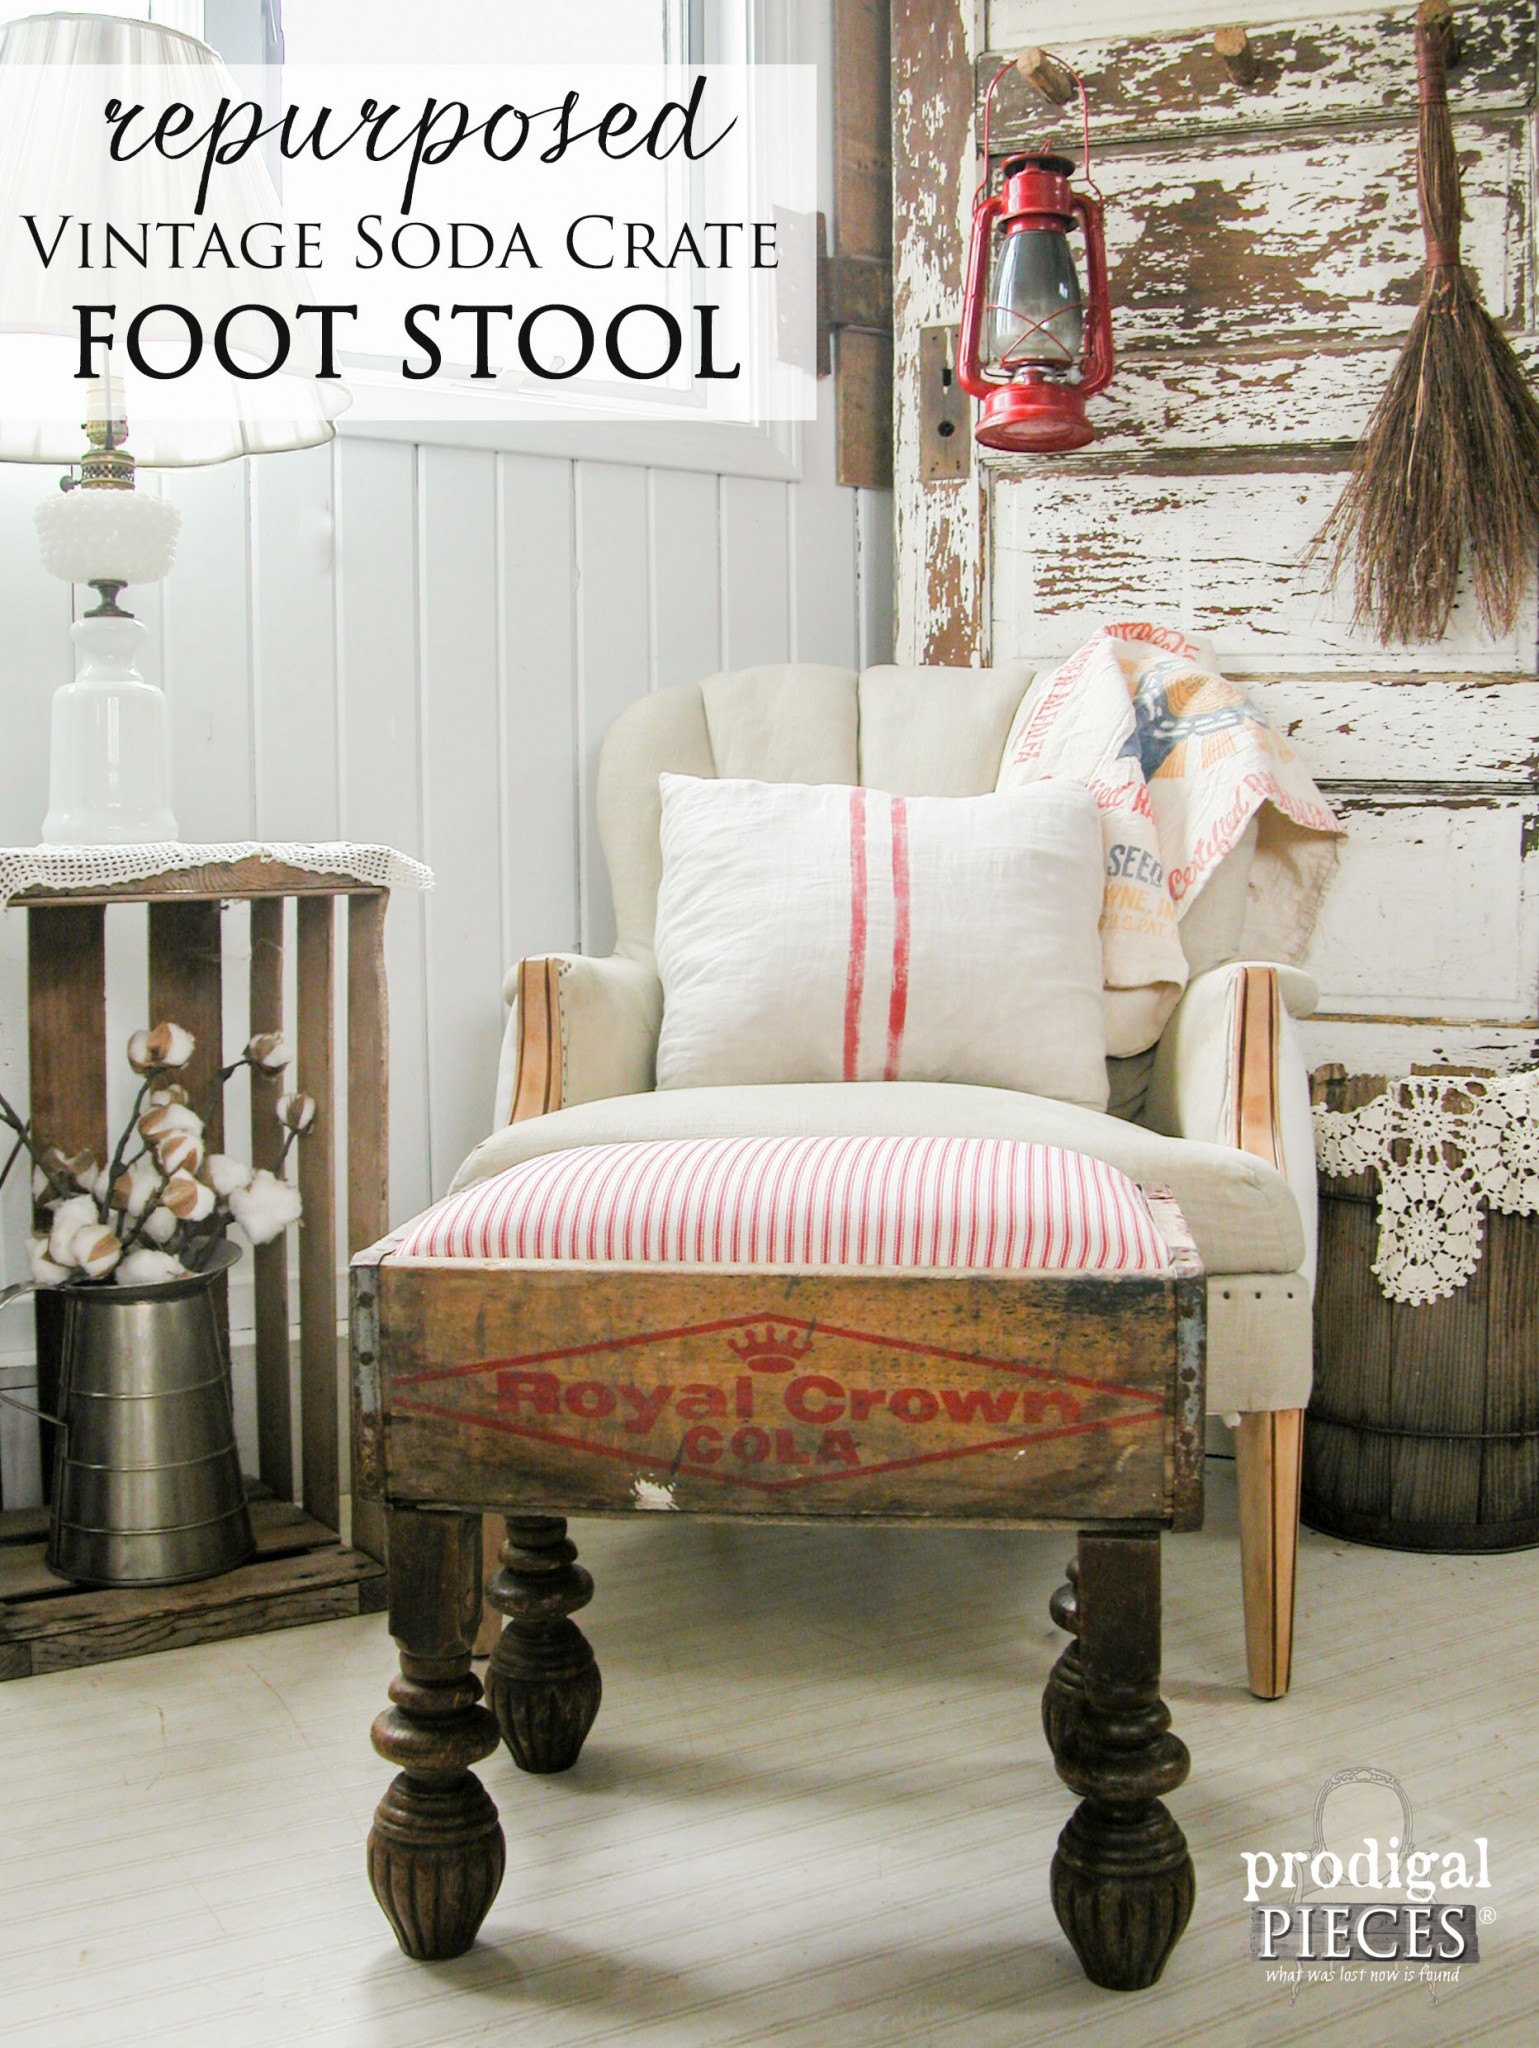 Vintage Soda Crate Turned Foot Stool, Wooden Bottle Crate Footstool